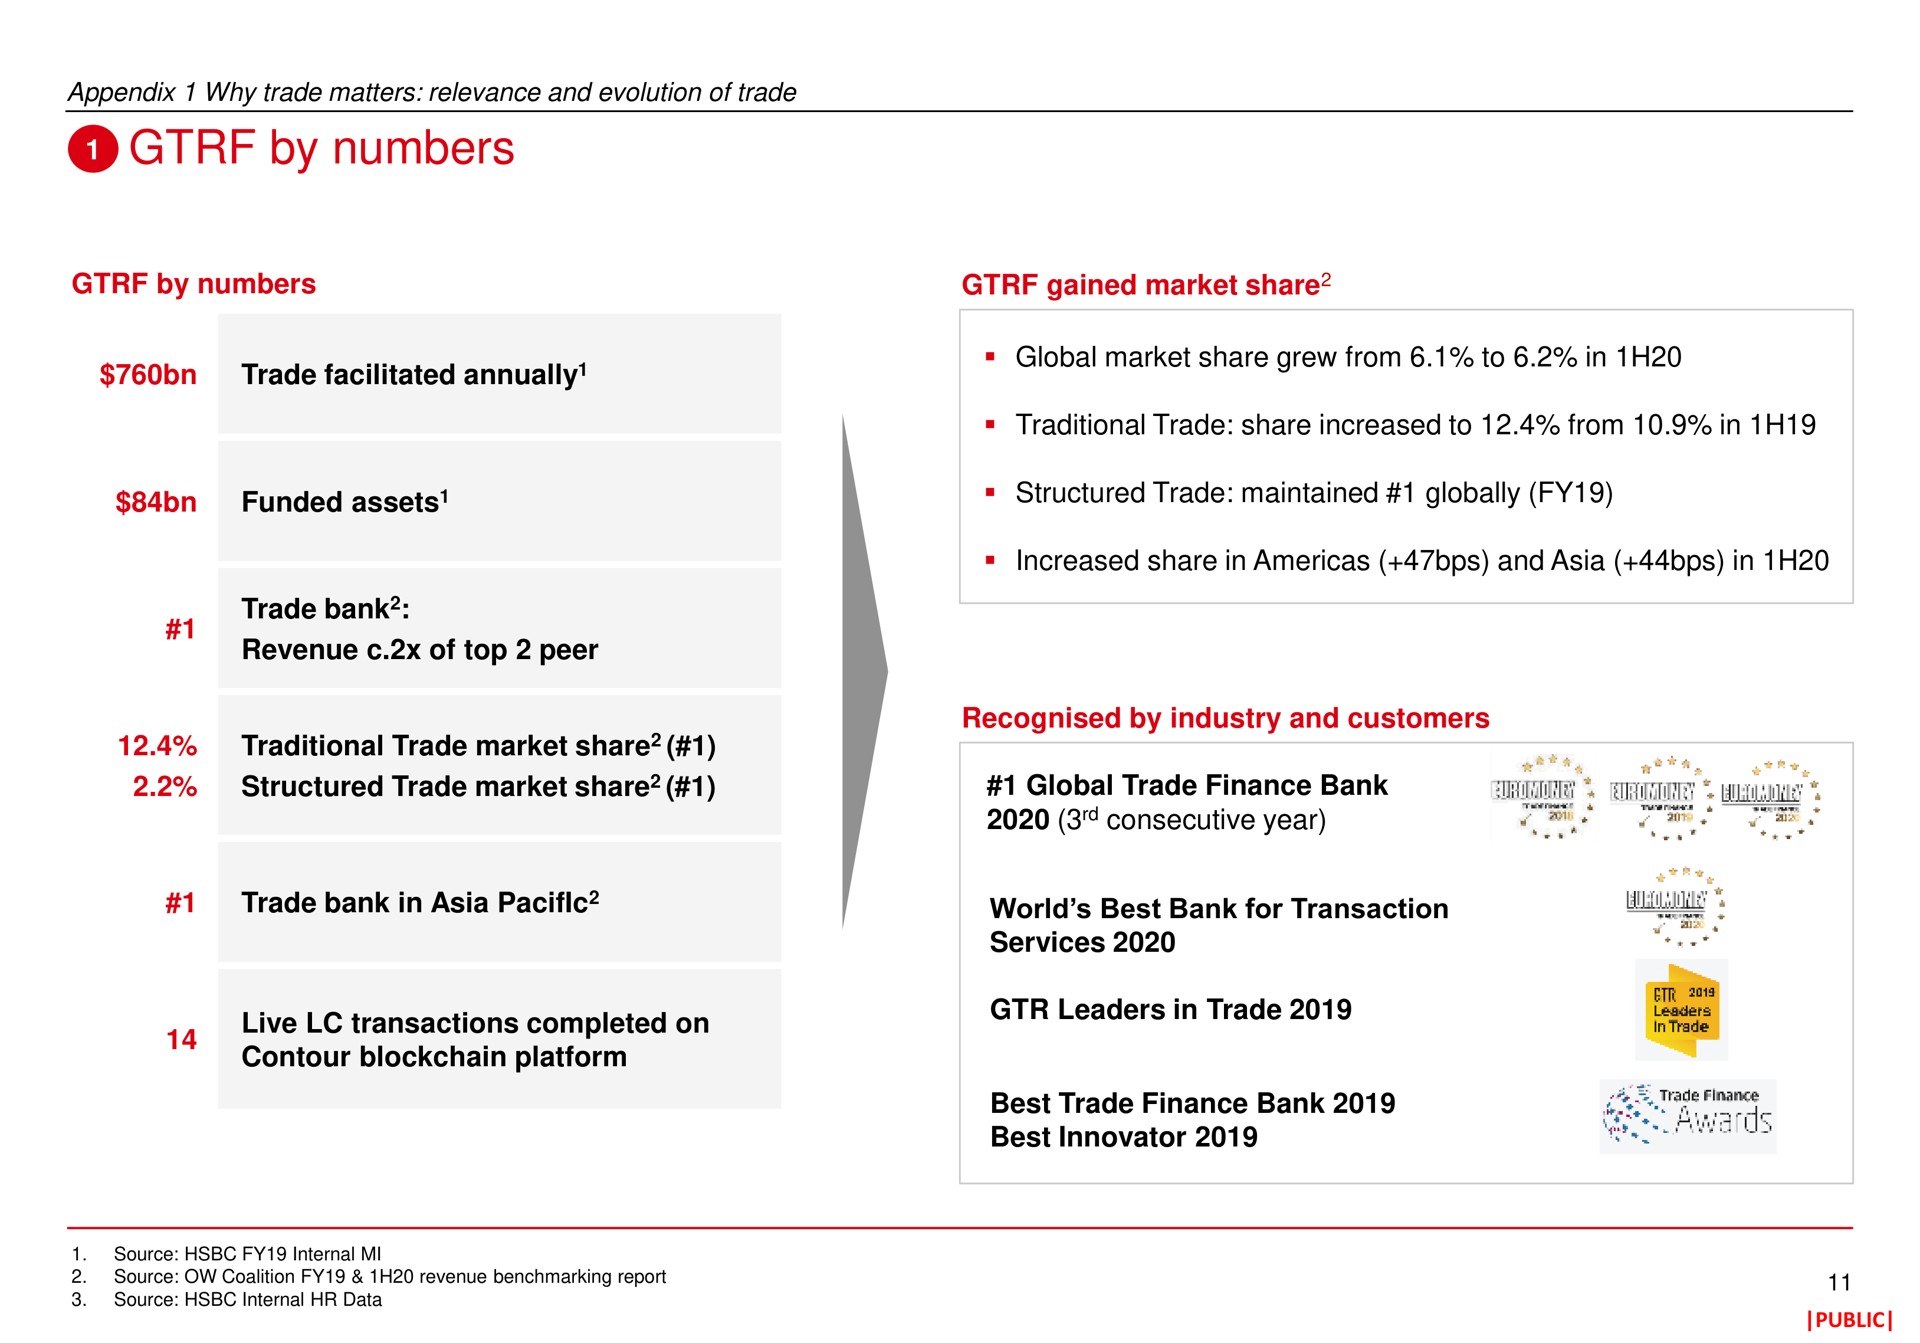 by numbers sure | HSBC